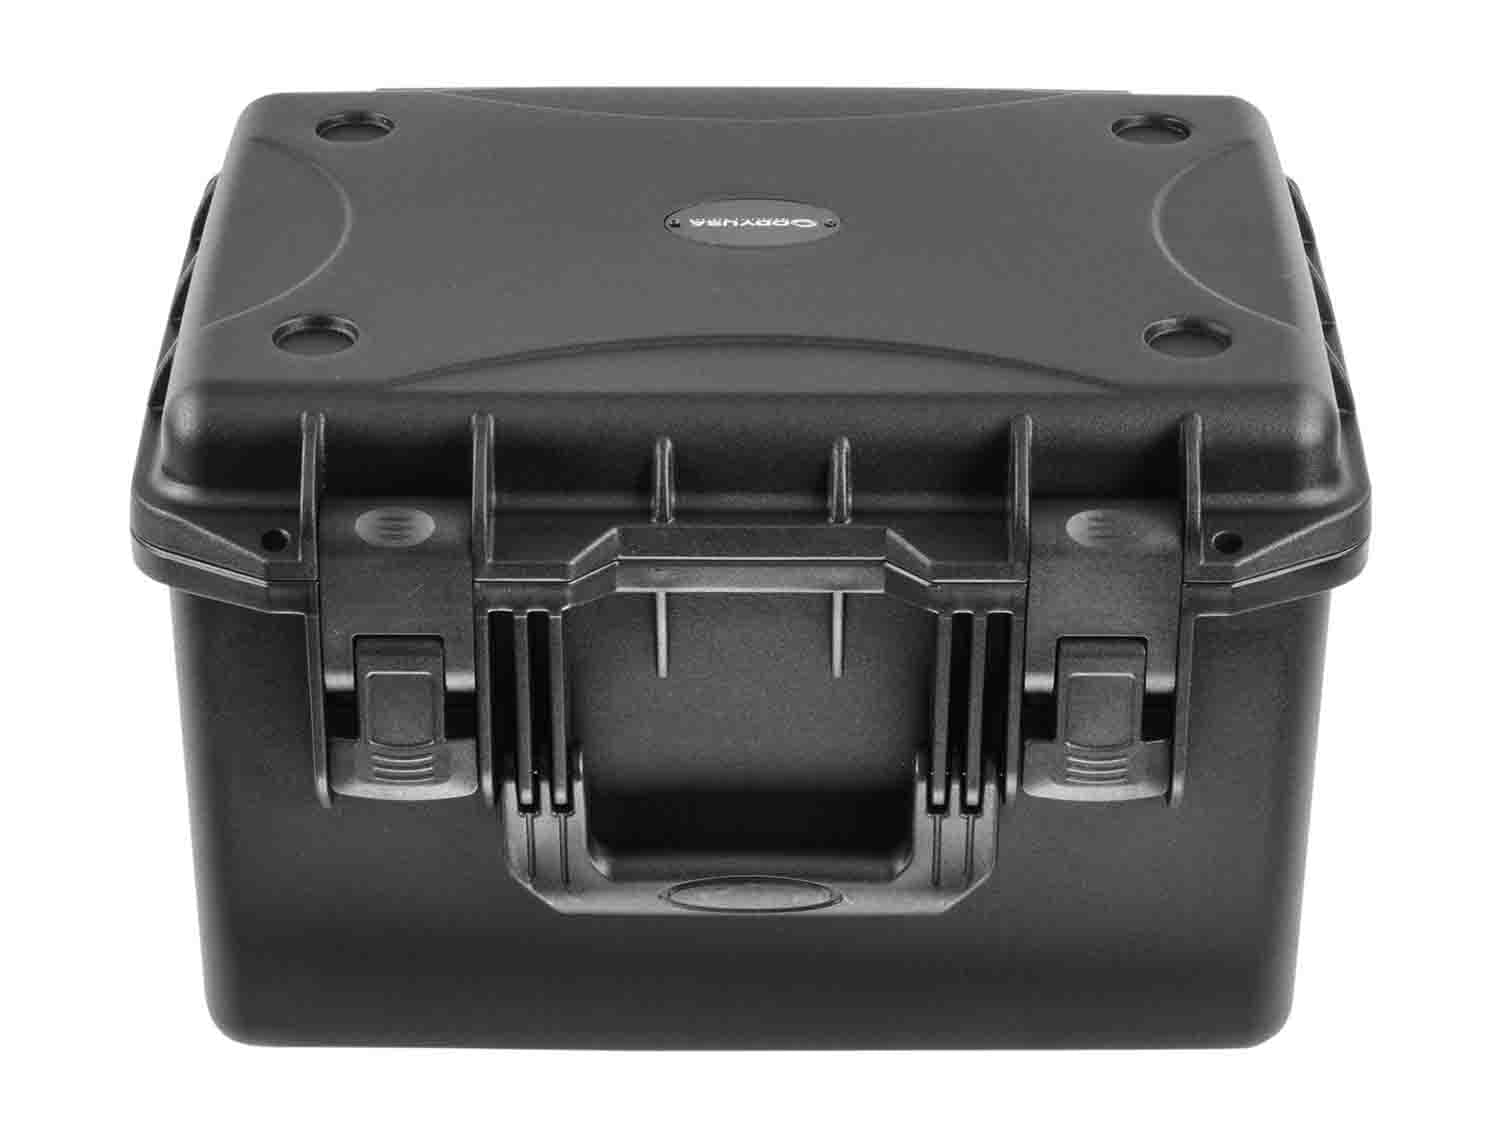 Odyssey VU151010 Vulcan Injection-Molded Utility Case with Pluck Foam - 15 x 10.5 x 8.25" Interior - Hollywood DJ